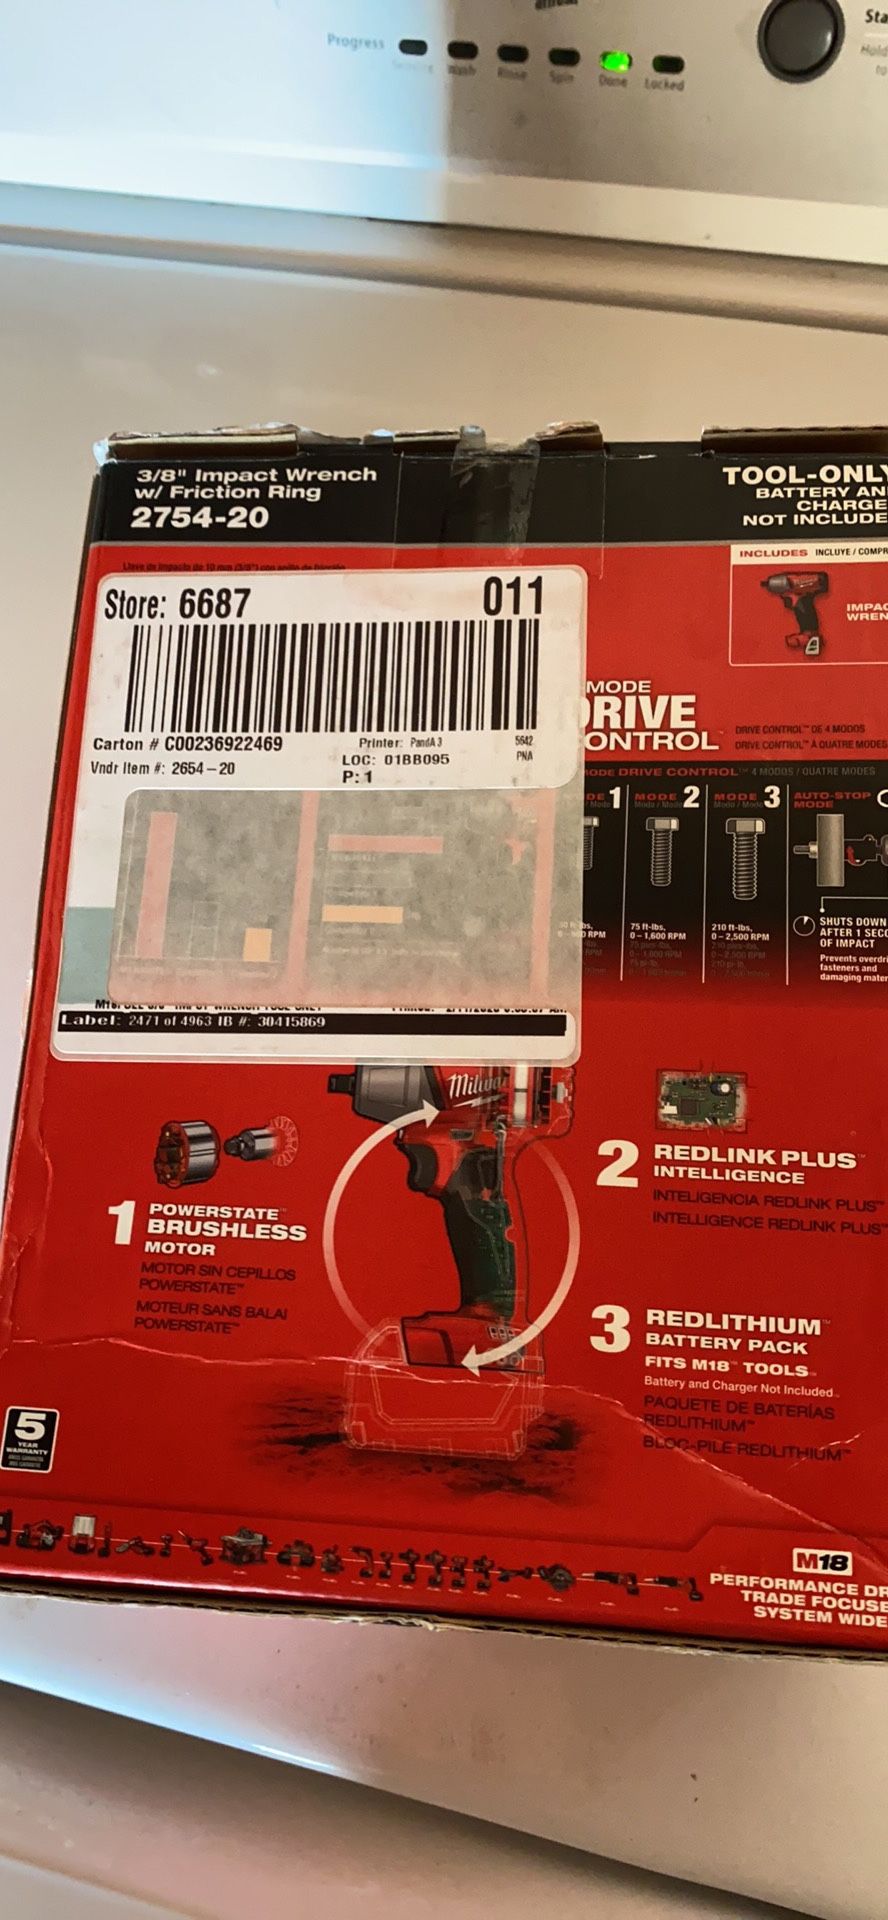 Milwaukee m18 3/8” impact wrench!! Brand new (tool only)